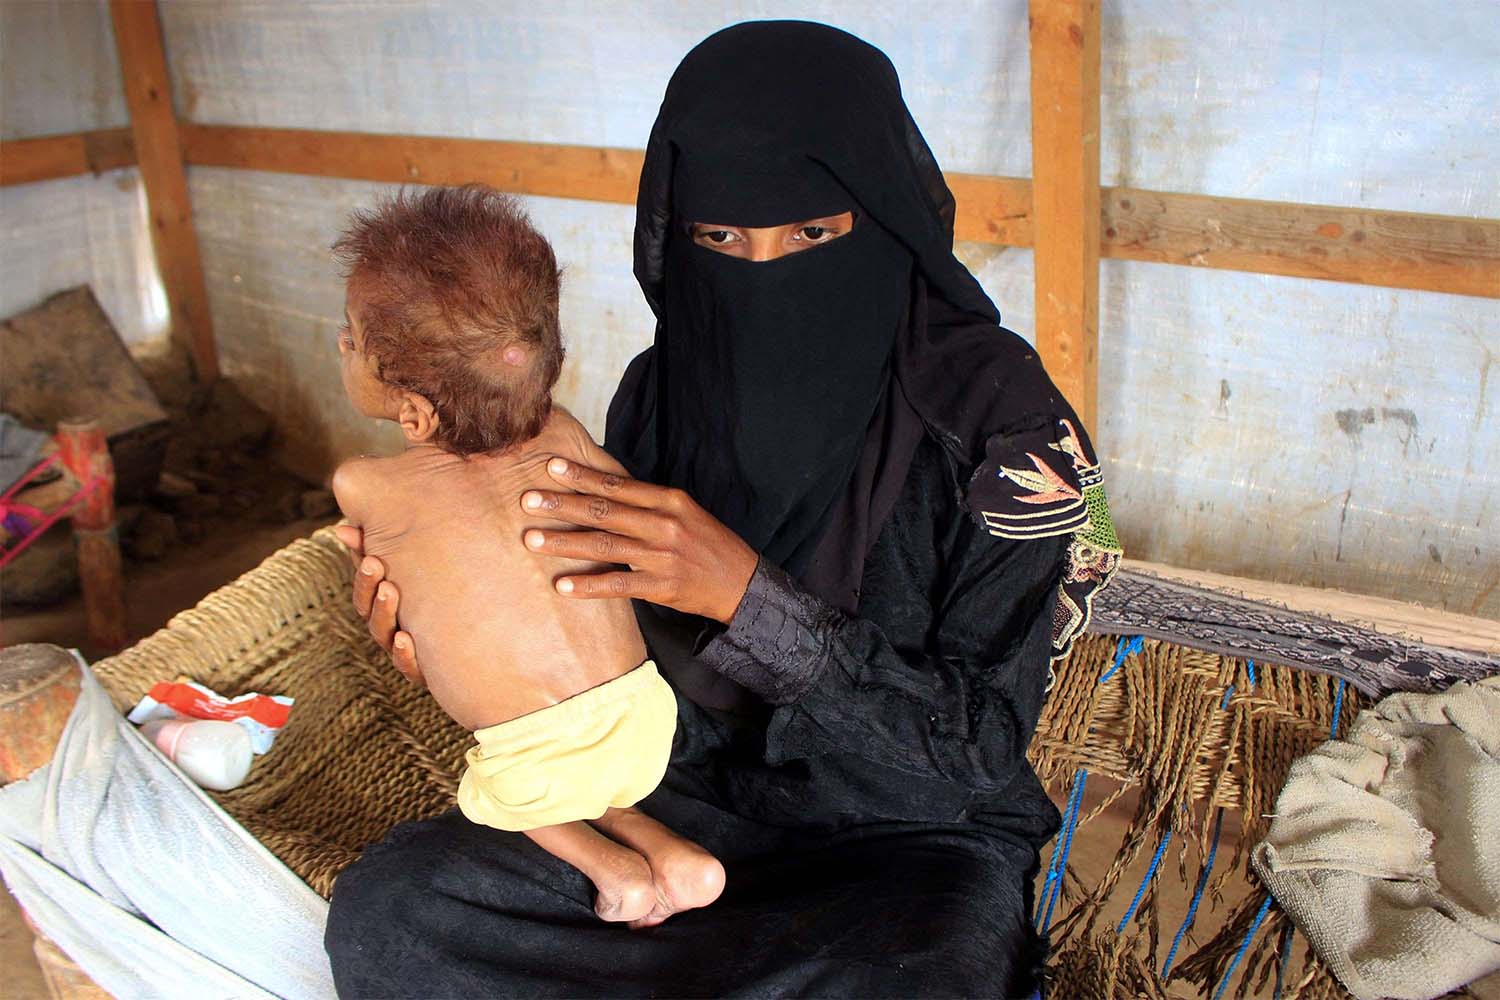 Yemen on the brink of large-scale famine